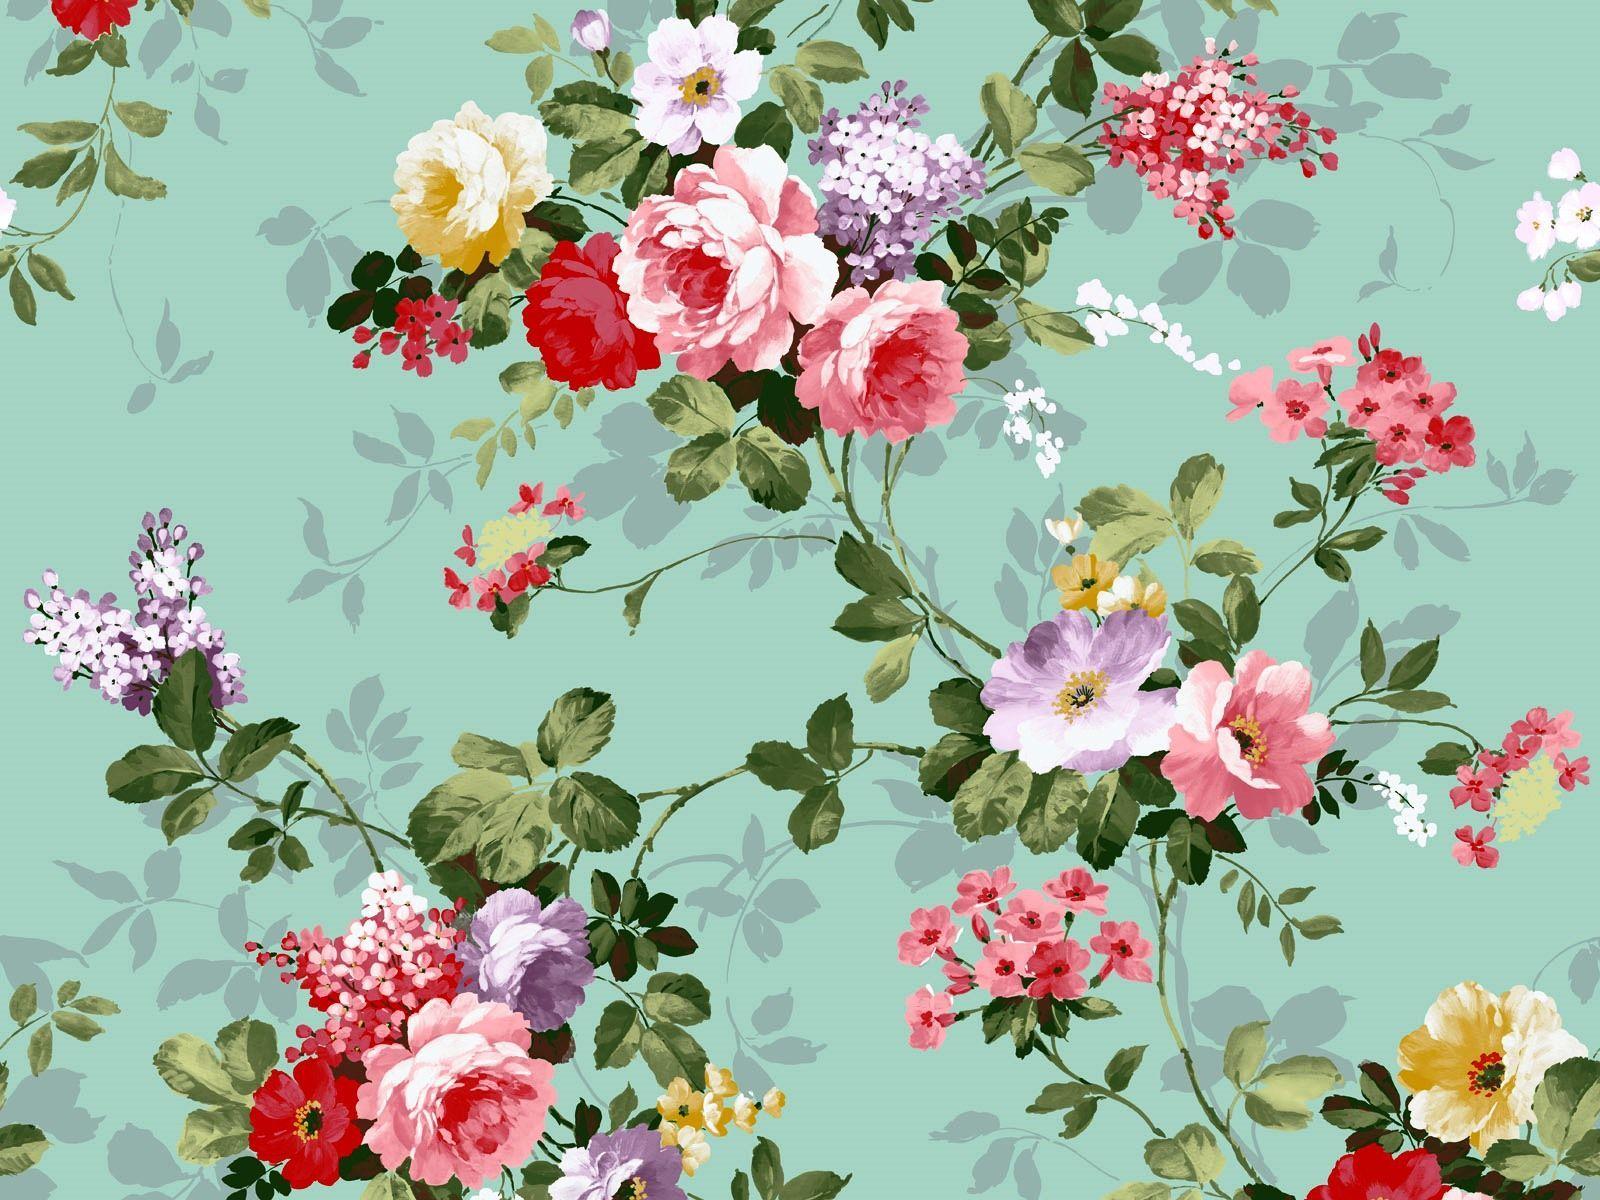 floral backgrounds tumblr wallpapers high quality